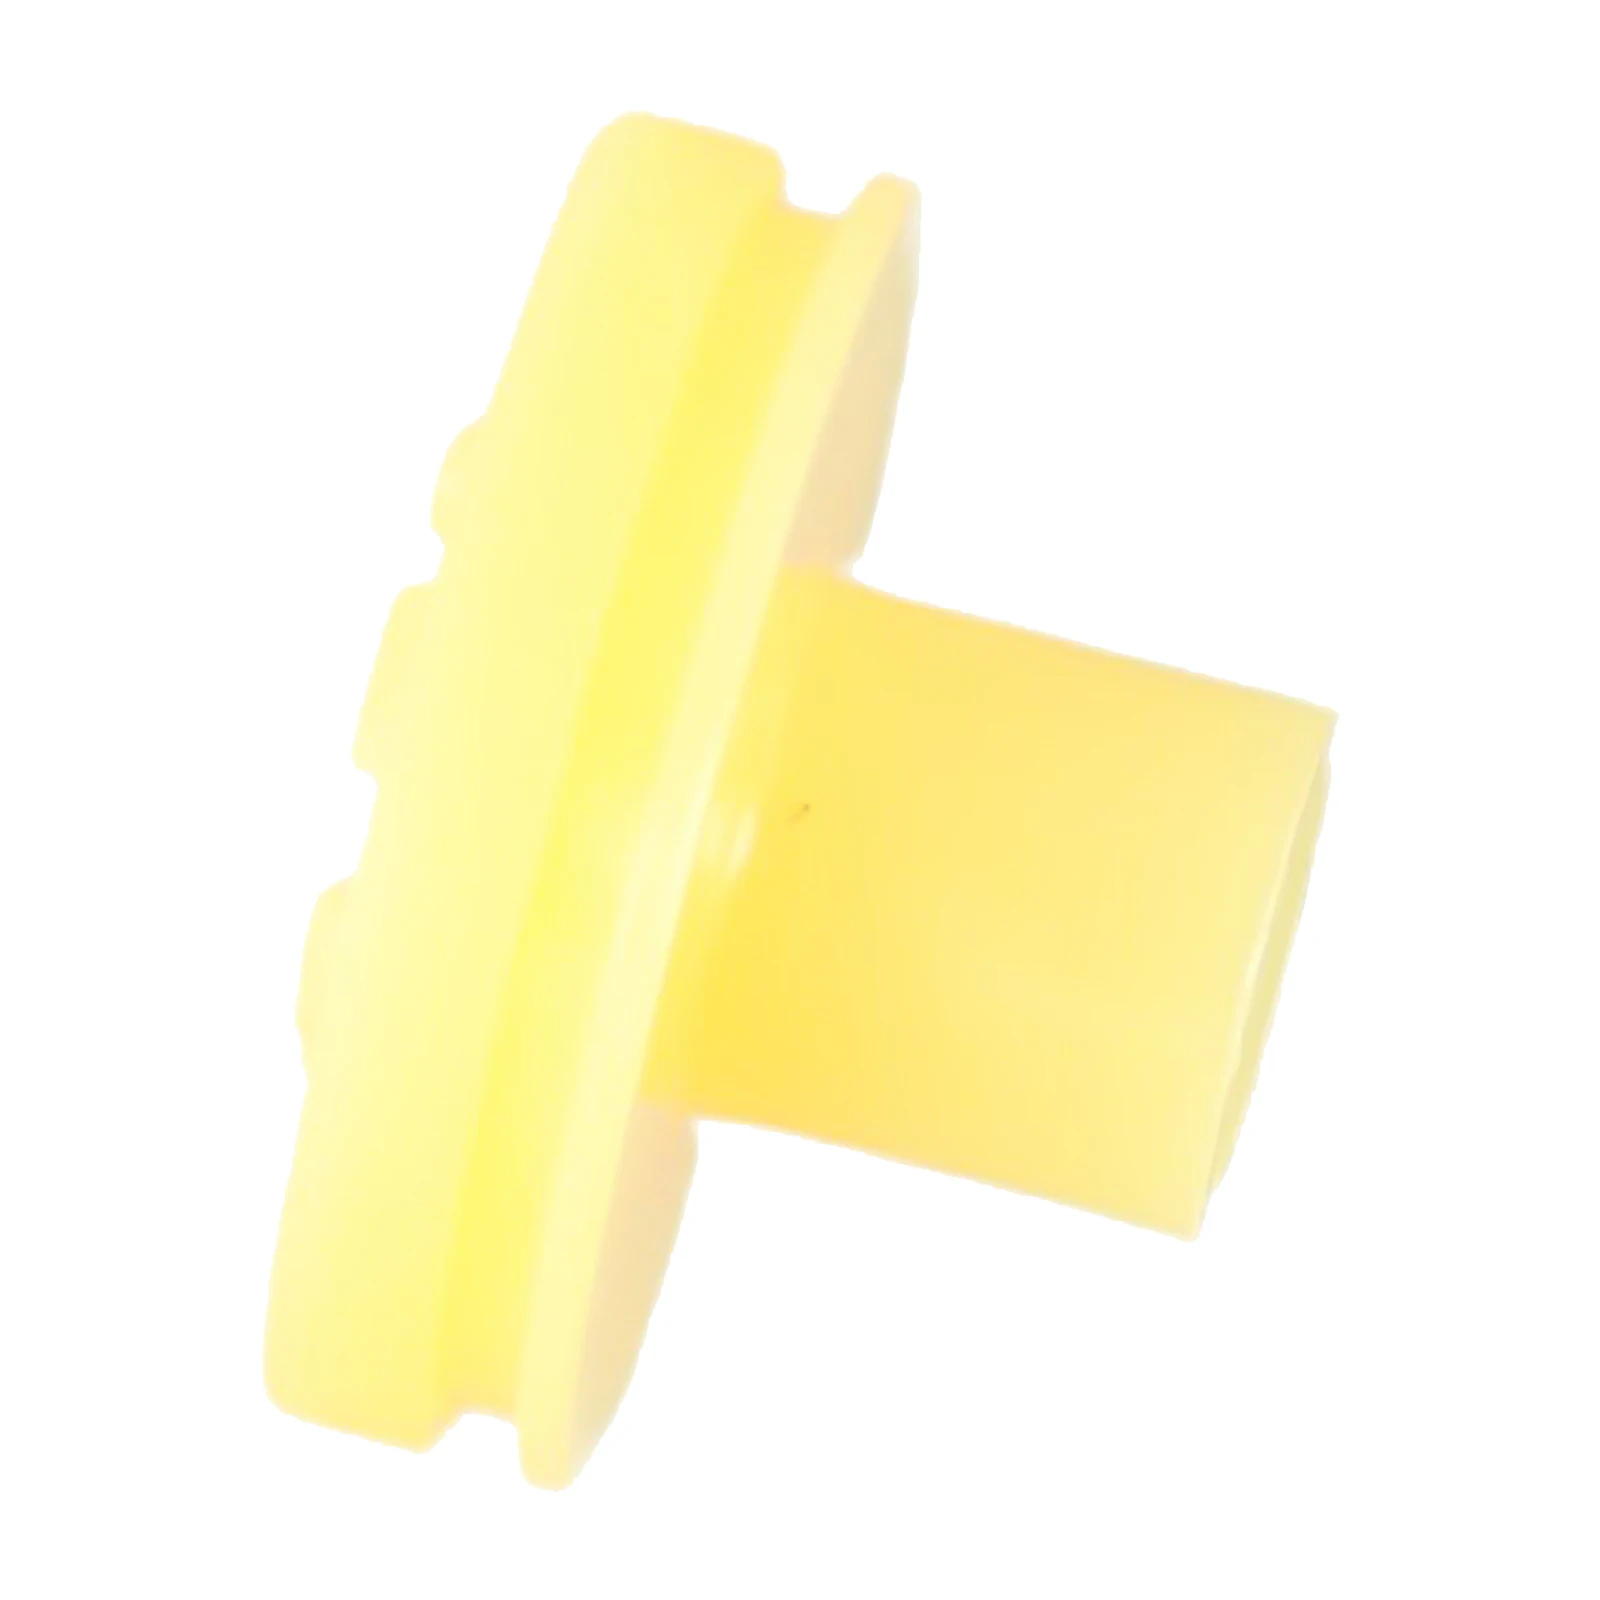 Nailer Head Valve Body 180450-S Nailer Head Valve Body Replaceable Accessories Yellow Color For BN200C BN200SB BN200SB